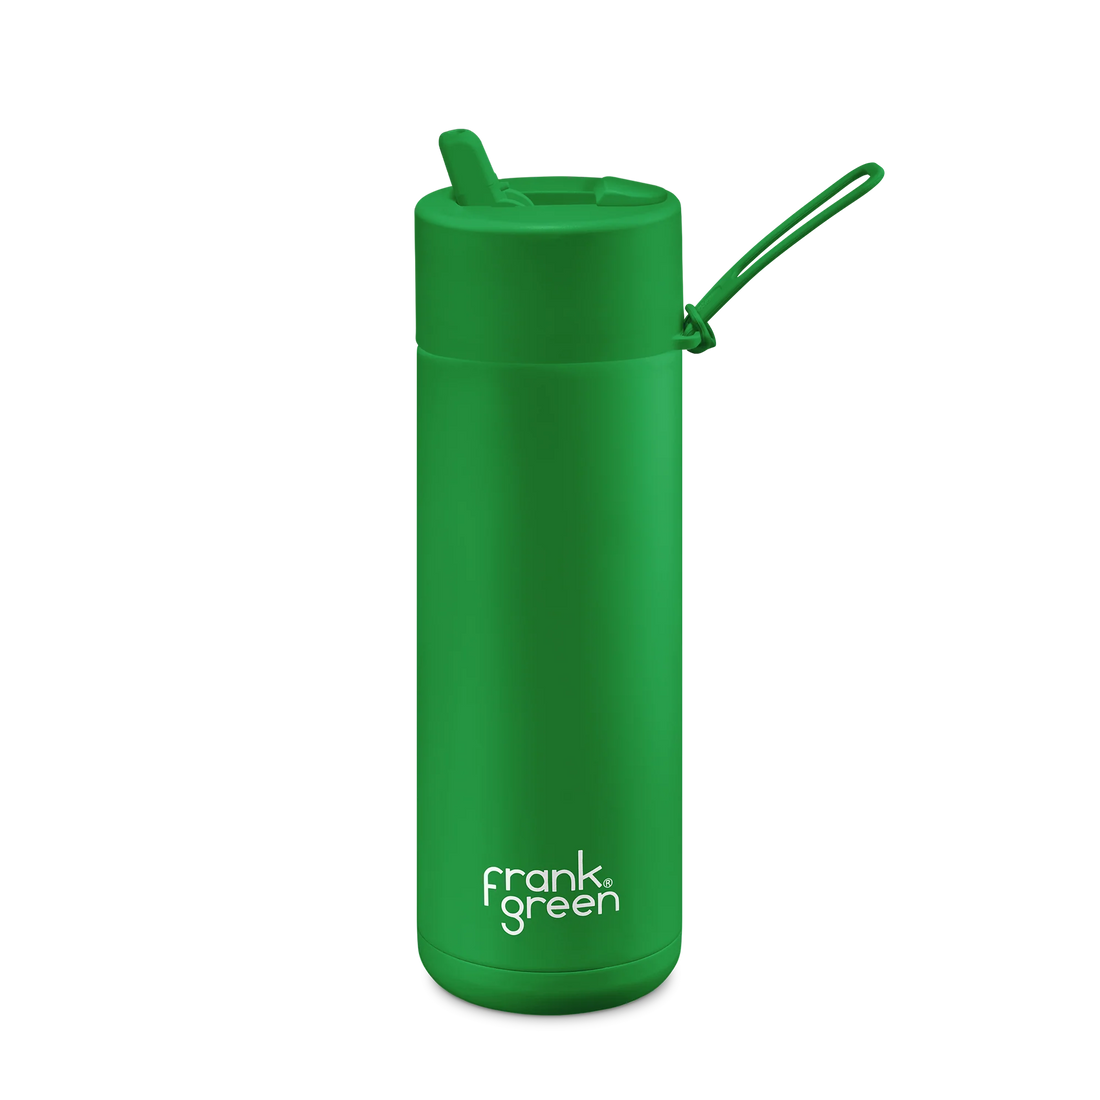 Frank Green Stainless Steel Ceramic Reusable Bottle Evergreen With Straw 20oz/595ml